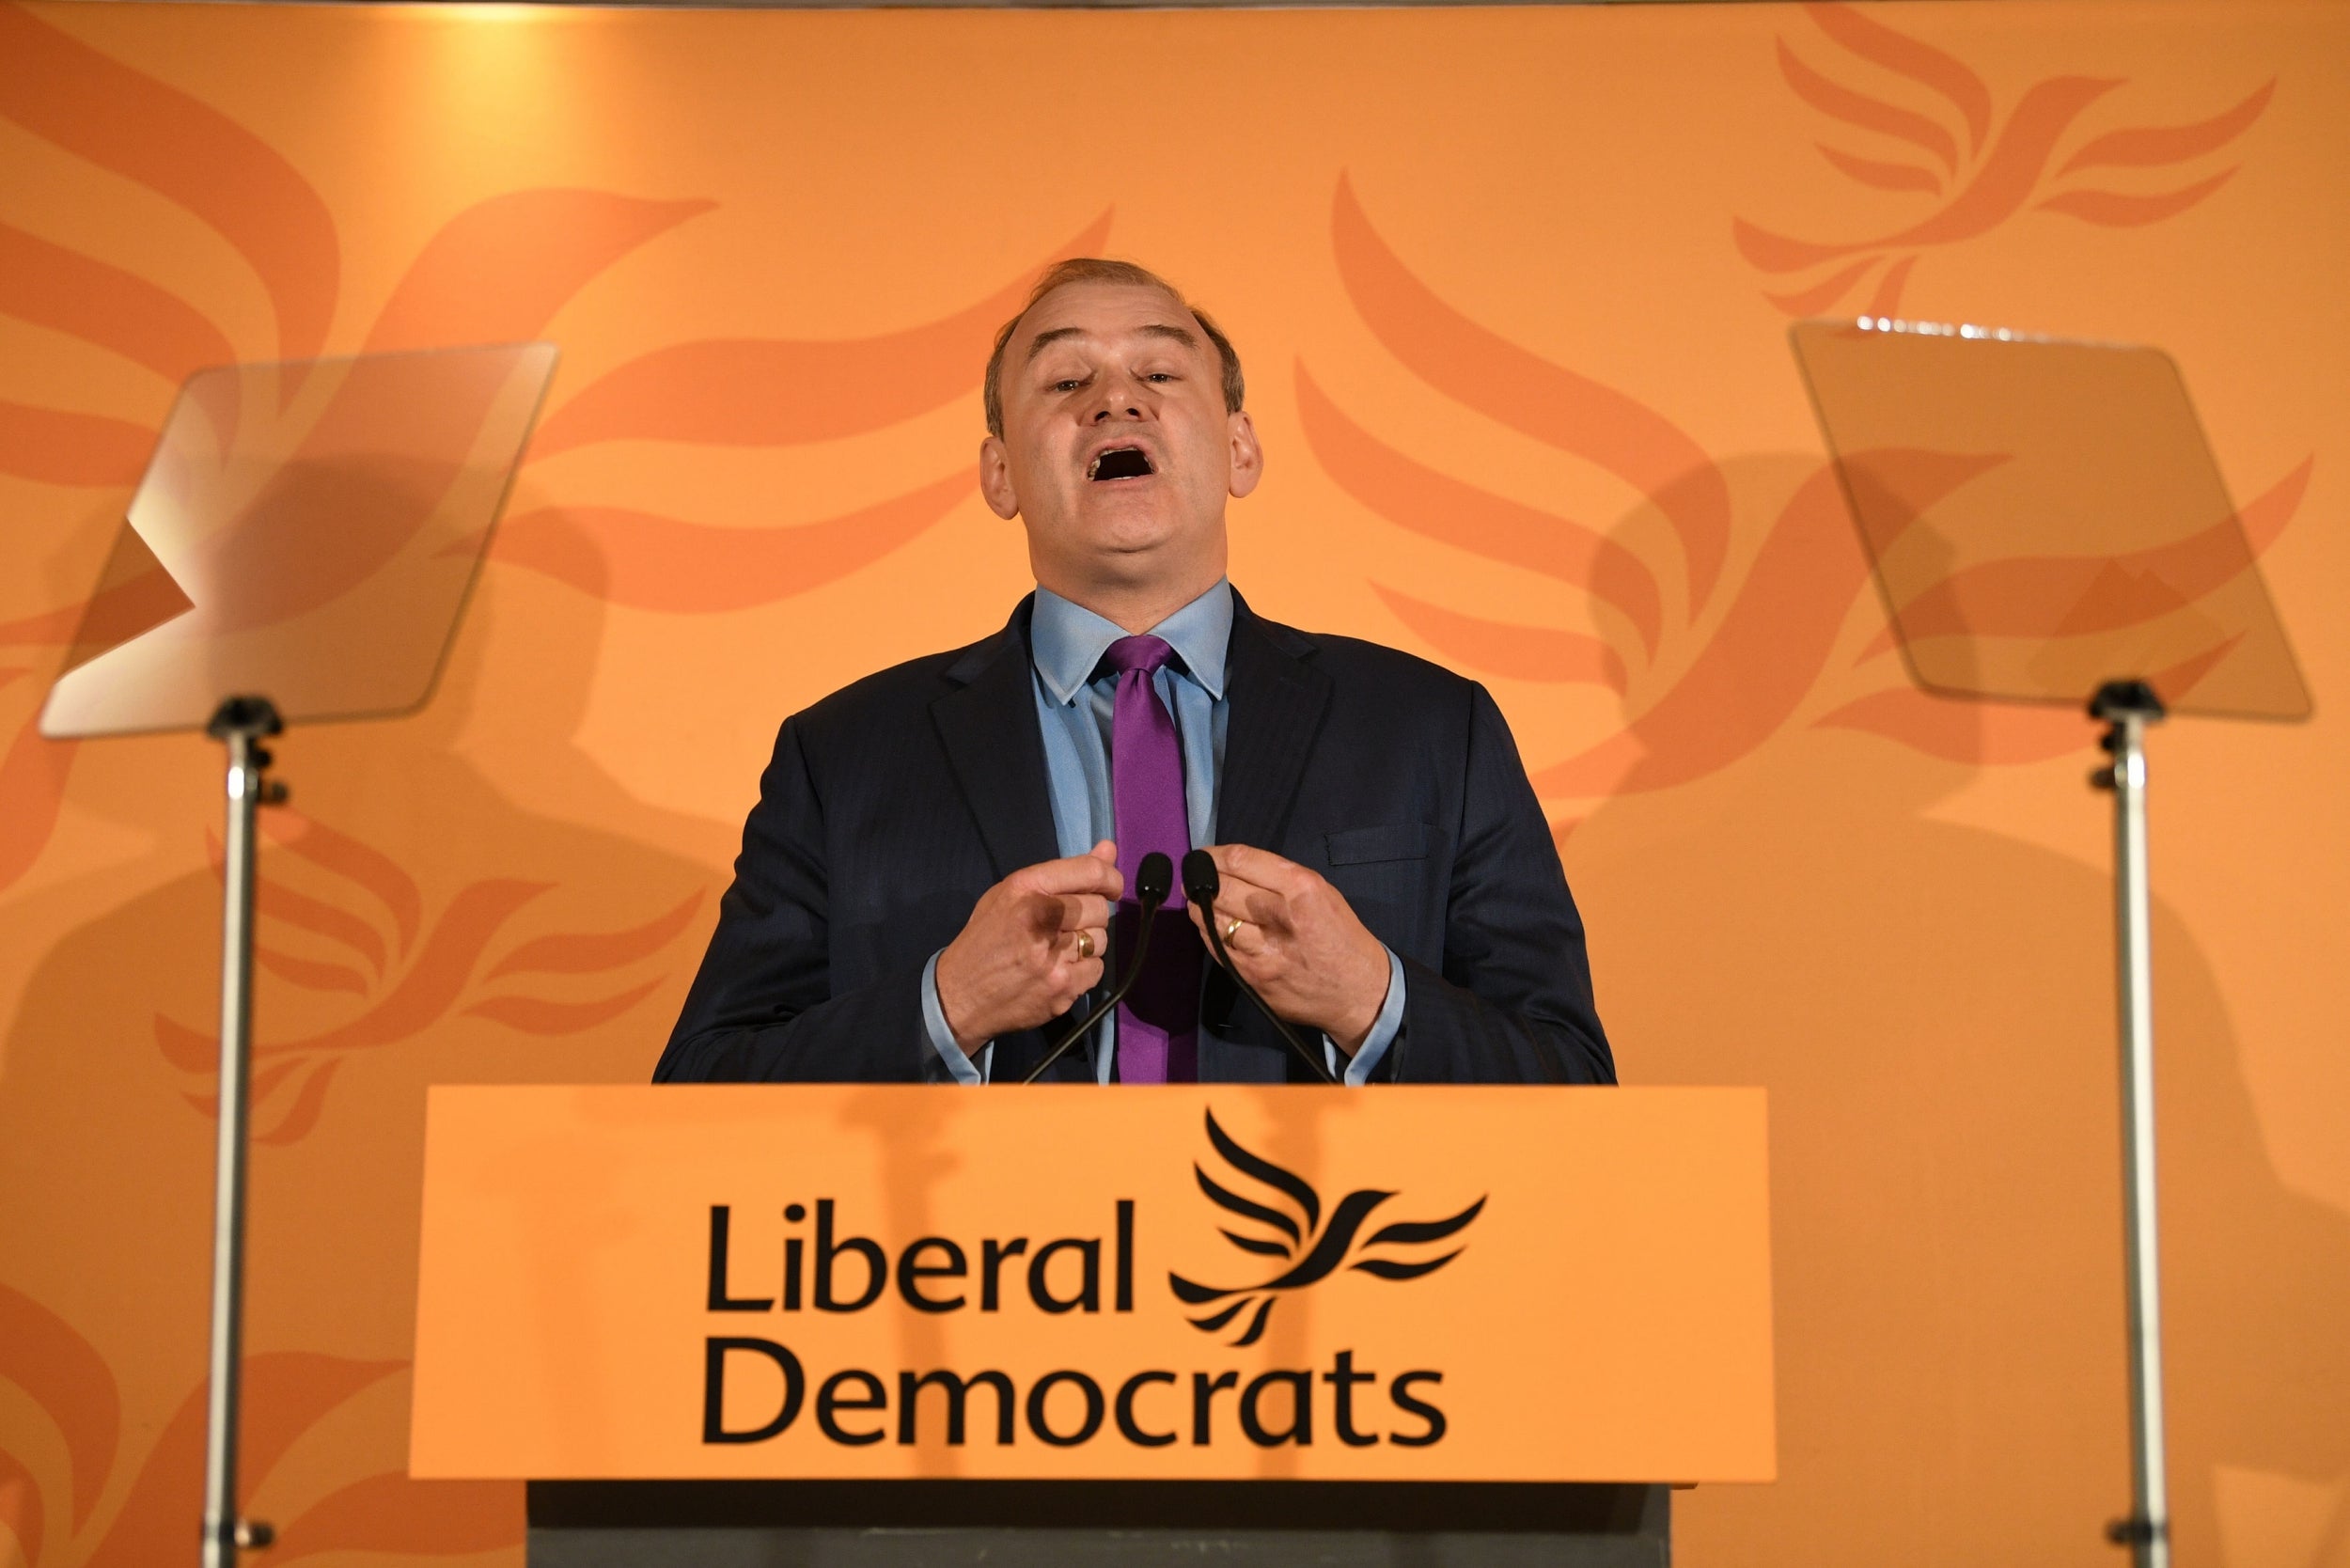 Labour will need the Lib Dems to do well to have any hope of climbing its proverbial mountain in one go